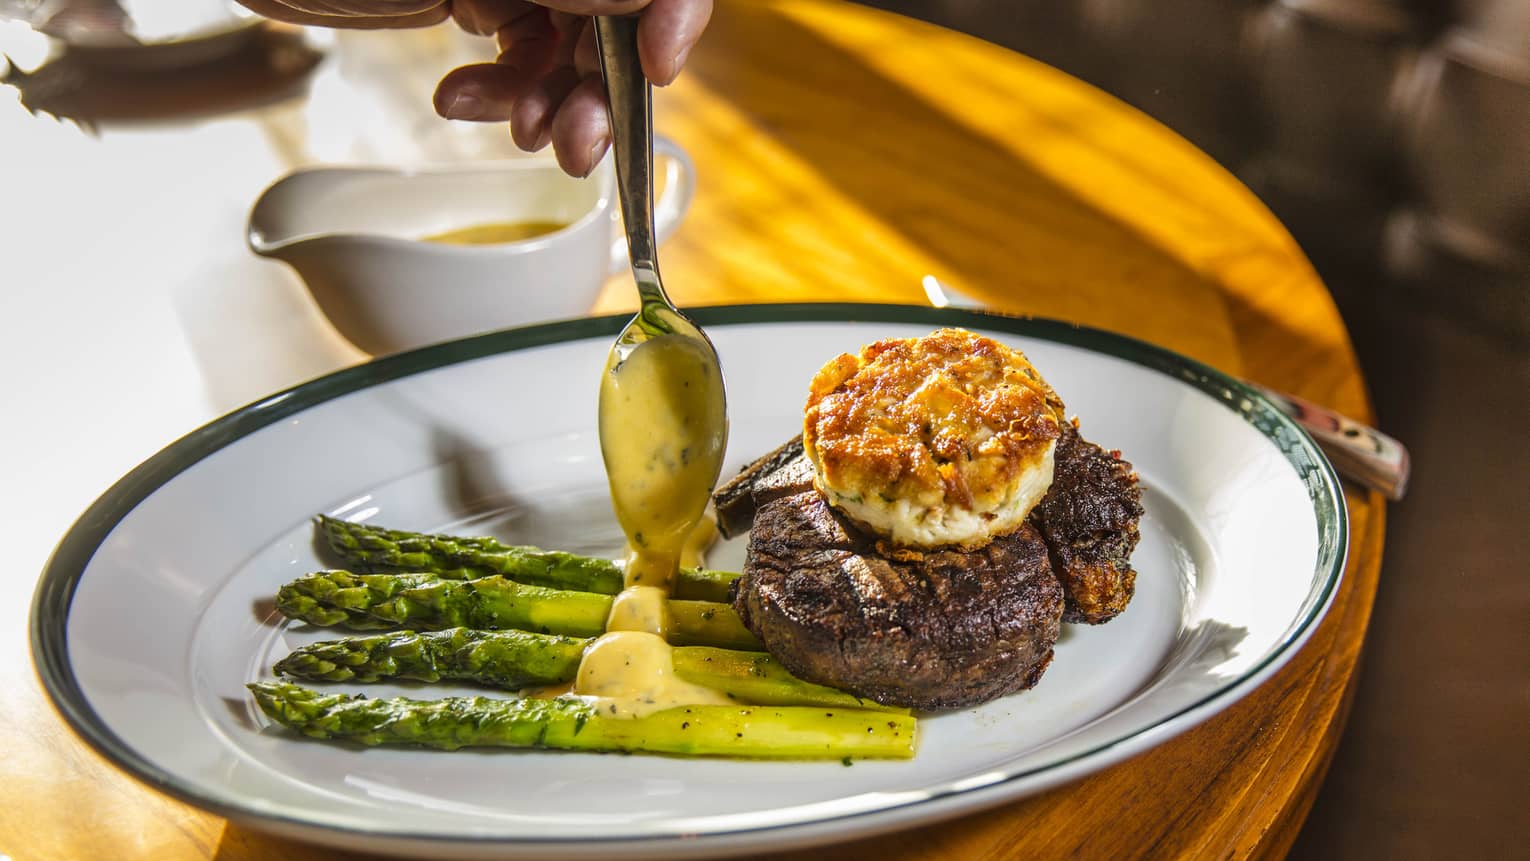 Spoon drizzles sauce over asparagus on plate with steak topped with fried cake